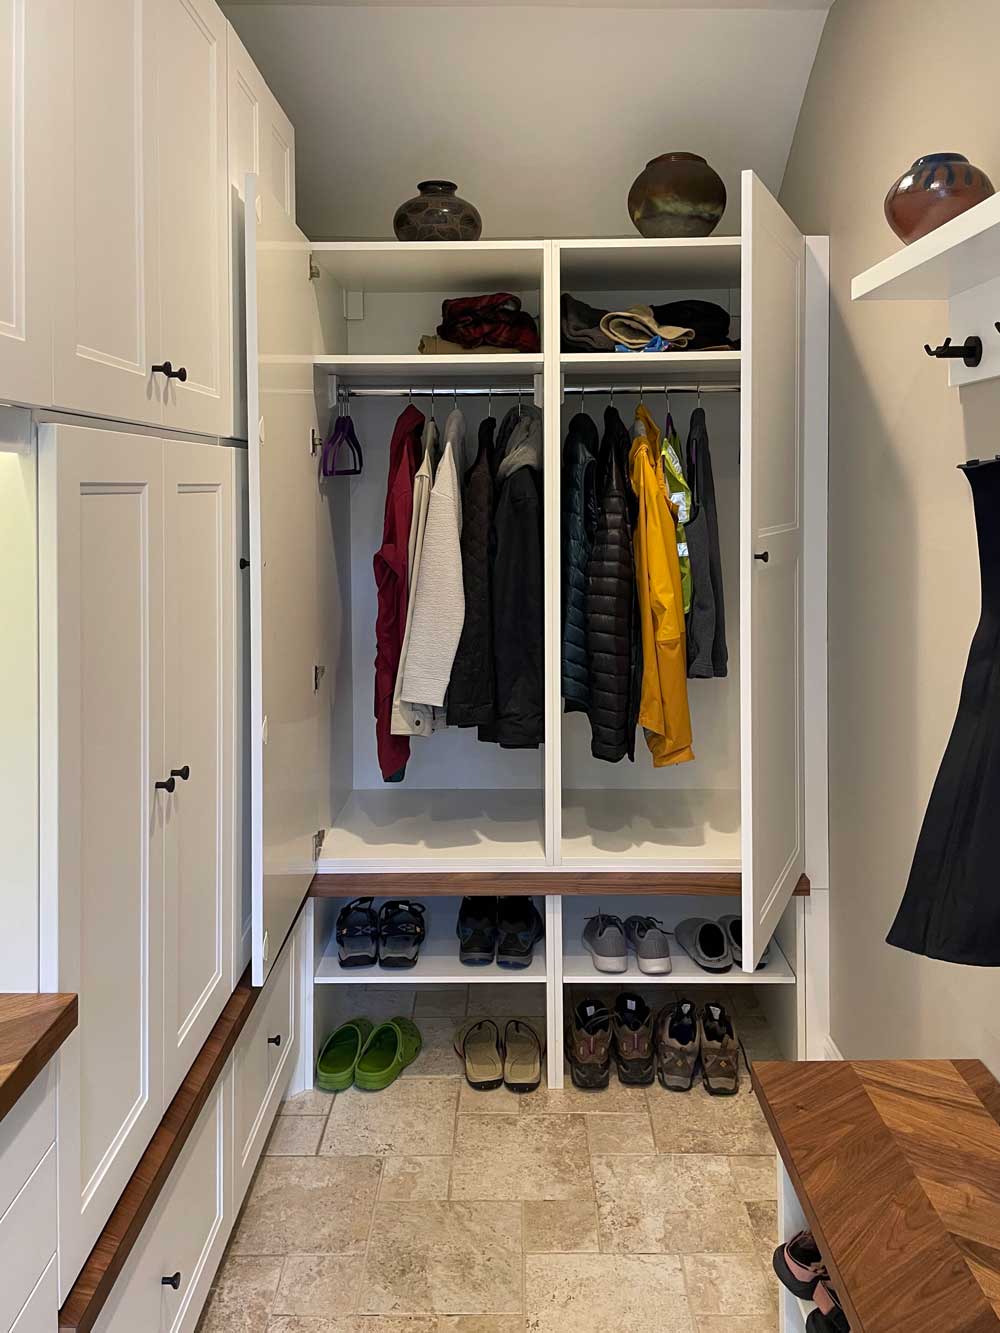 Mudroom built with IKEA cabinets